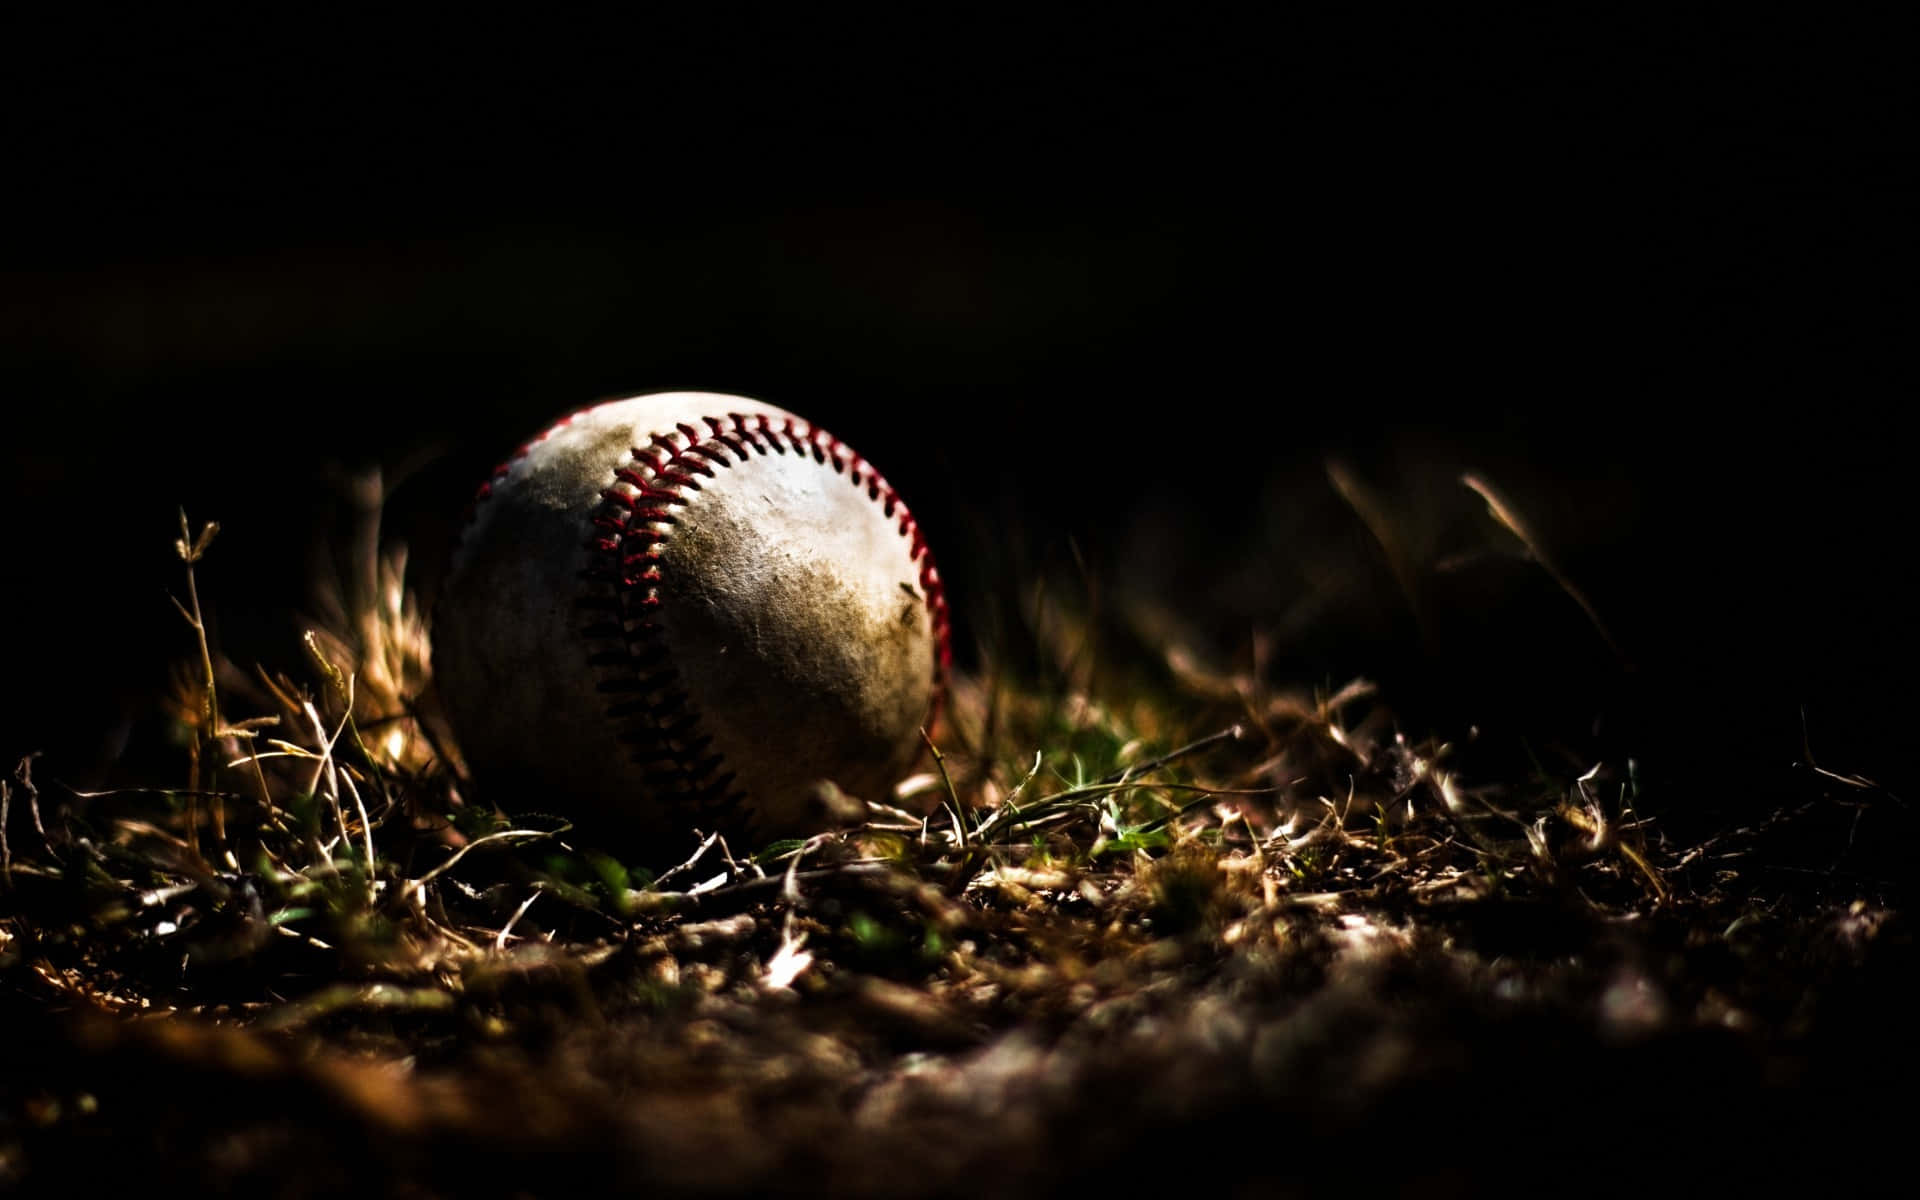 Take your game to the next level with Awesome Baseball Wallpaper